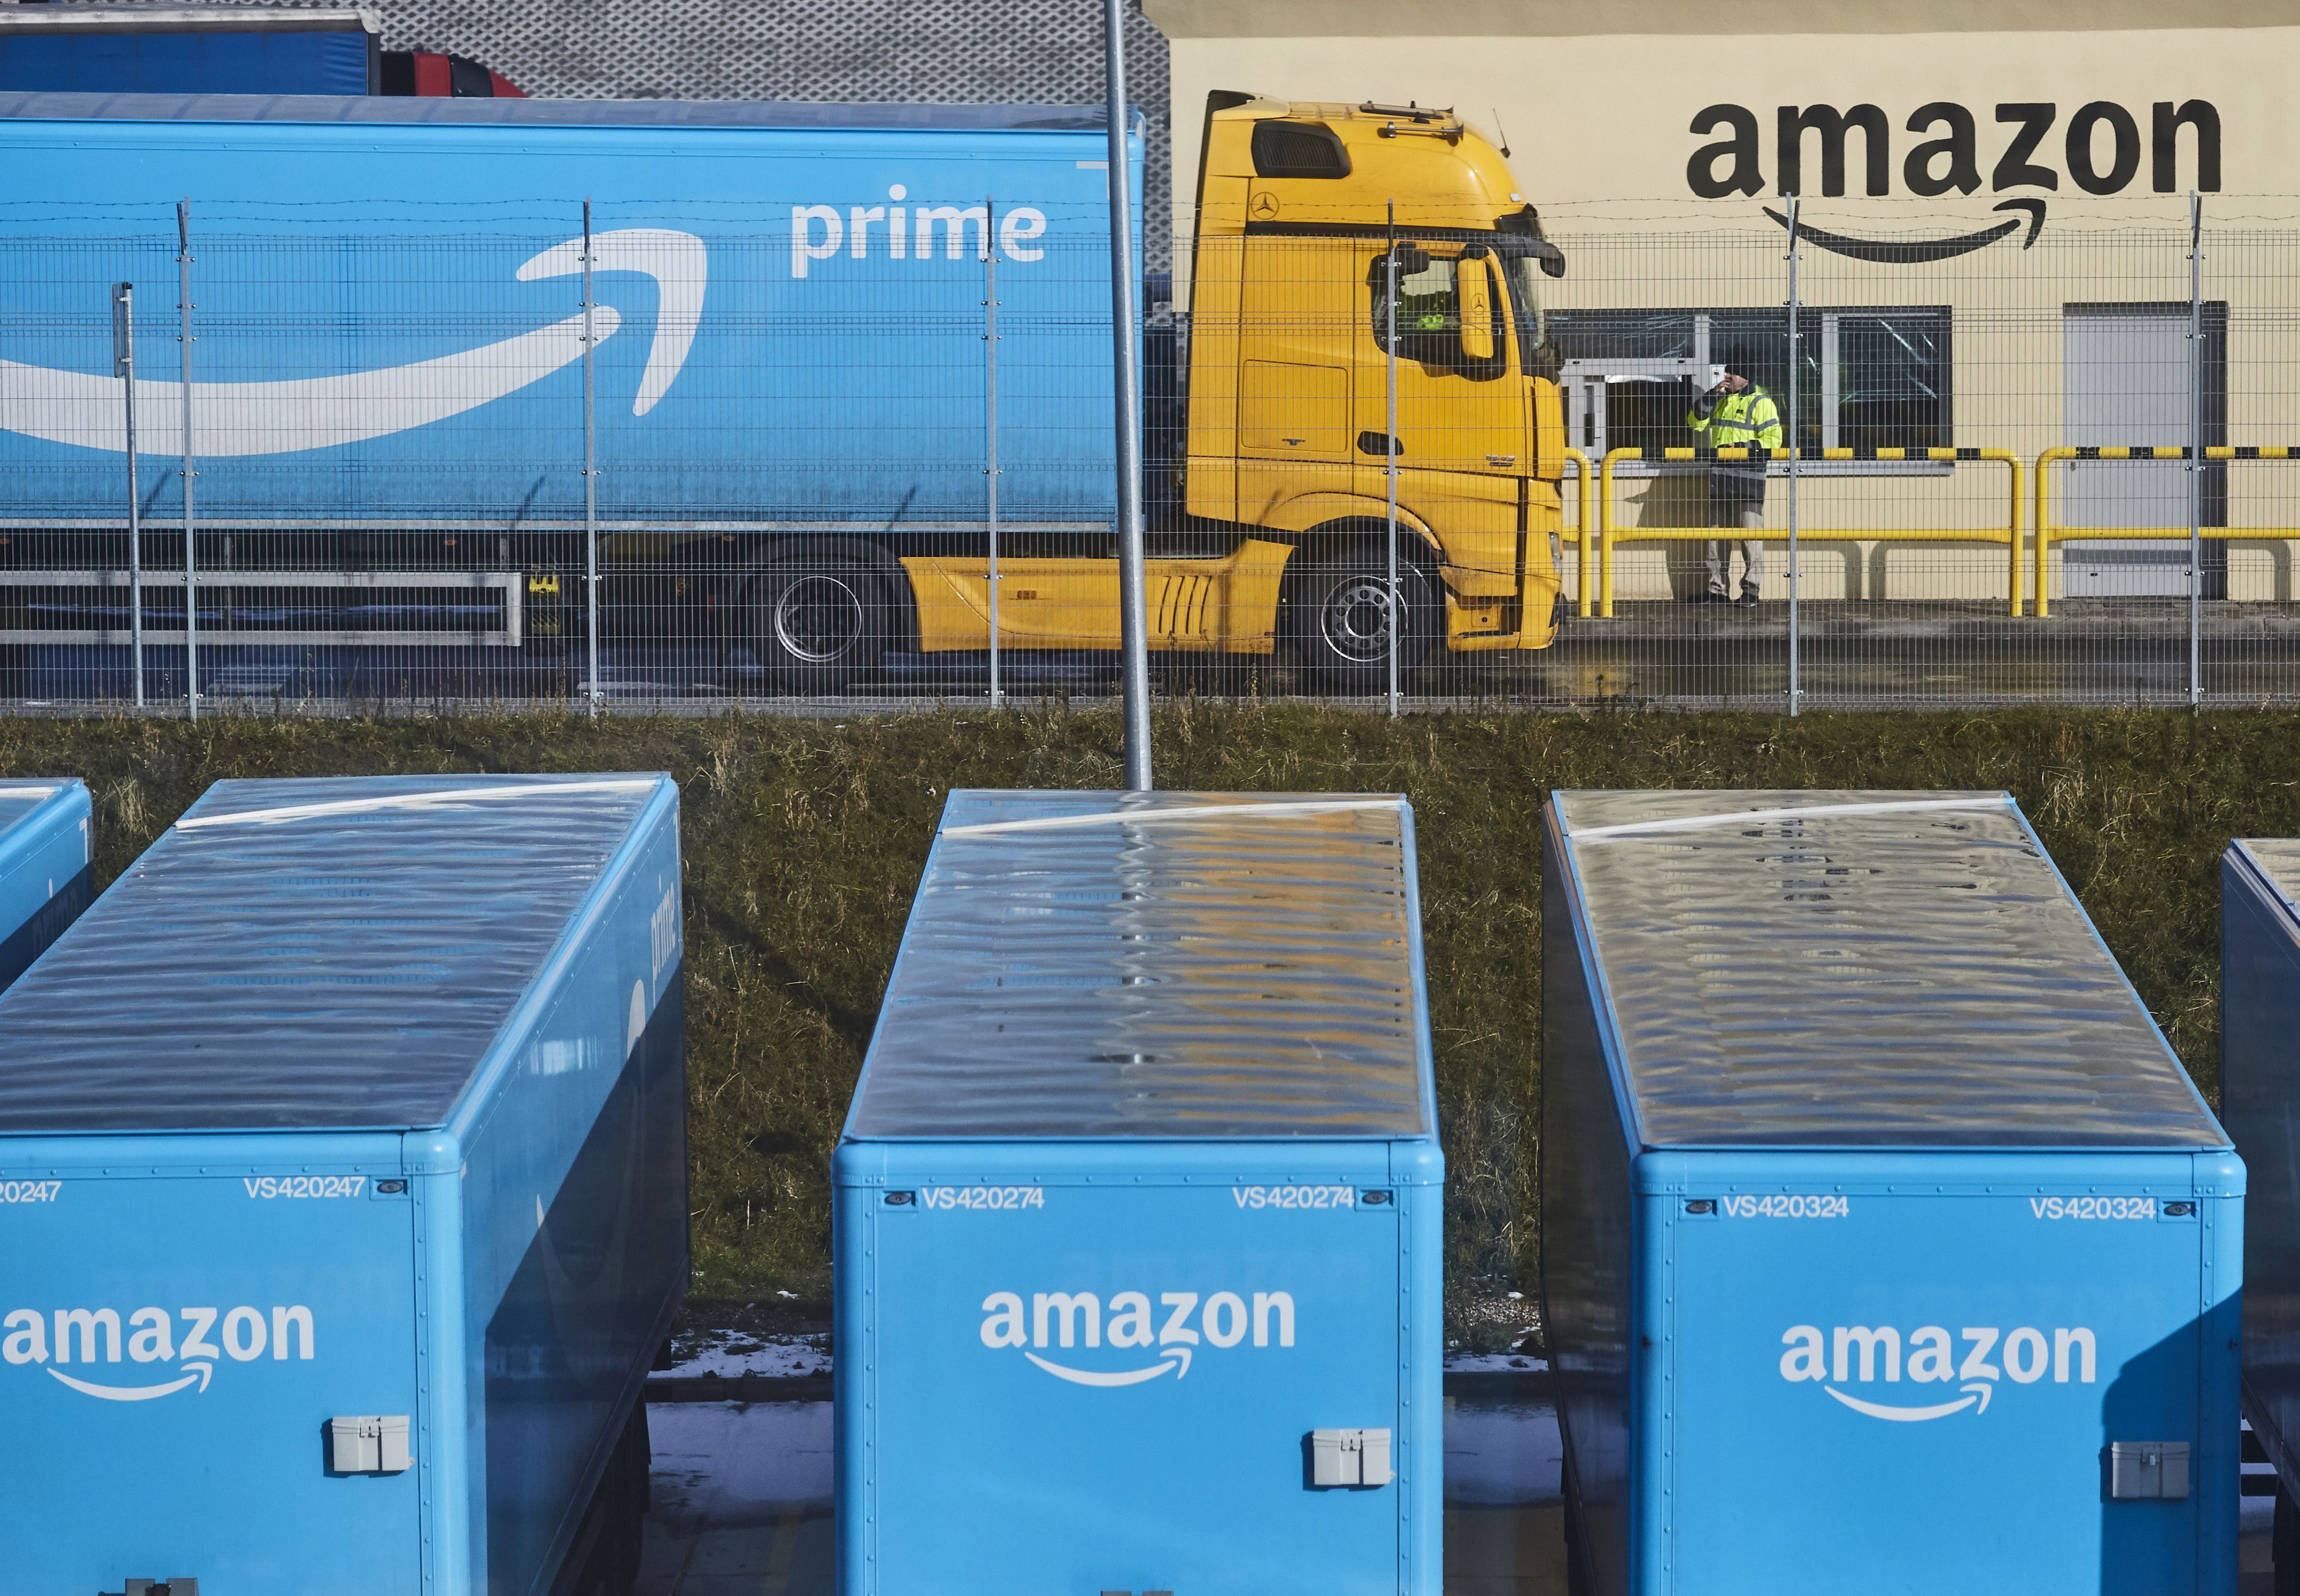 Amazon Prime Day will put its one-day delivery promise to the test